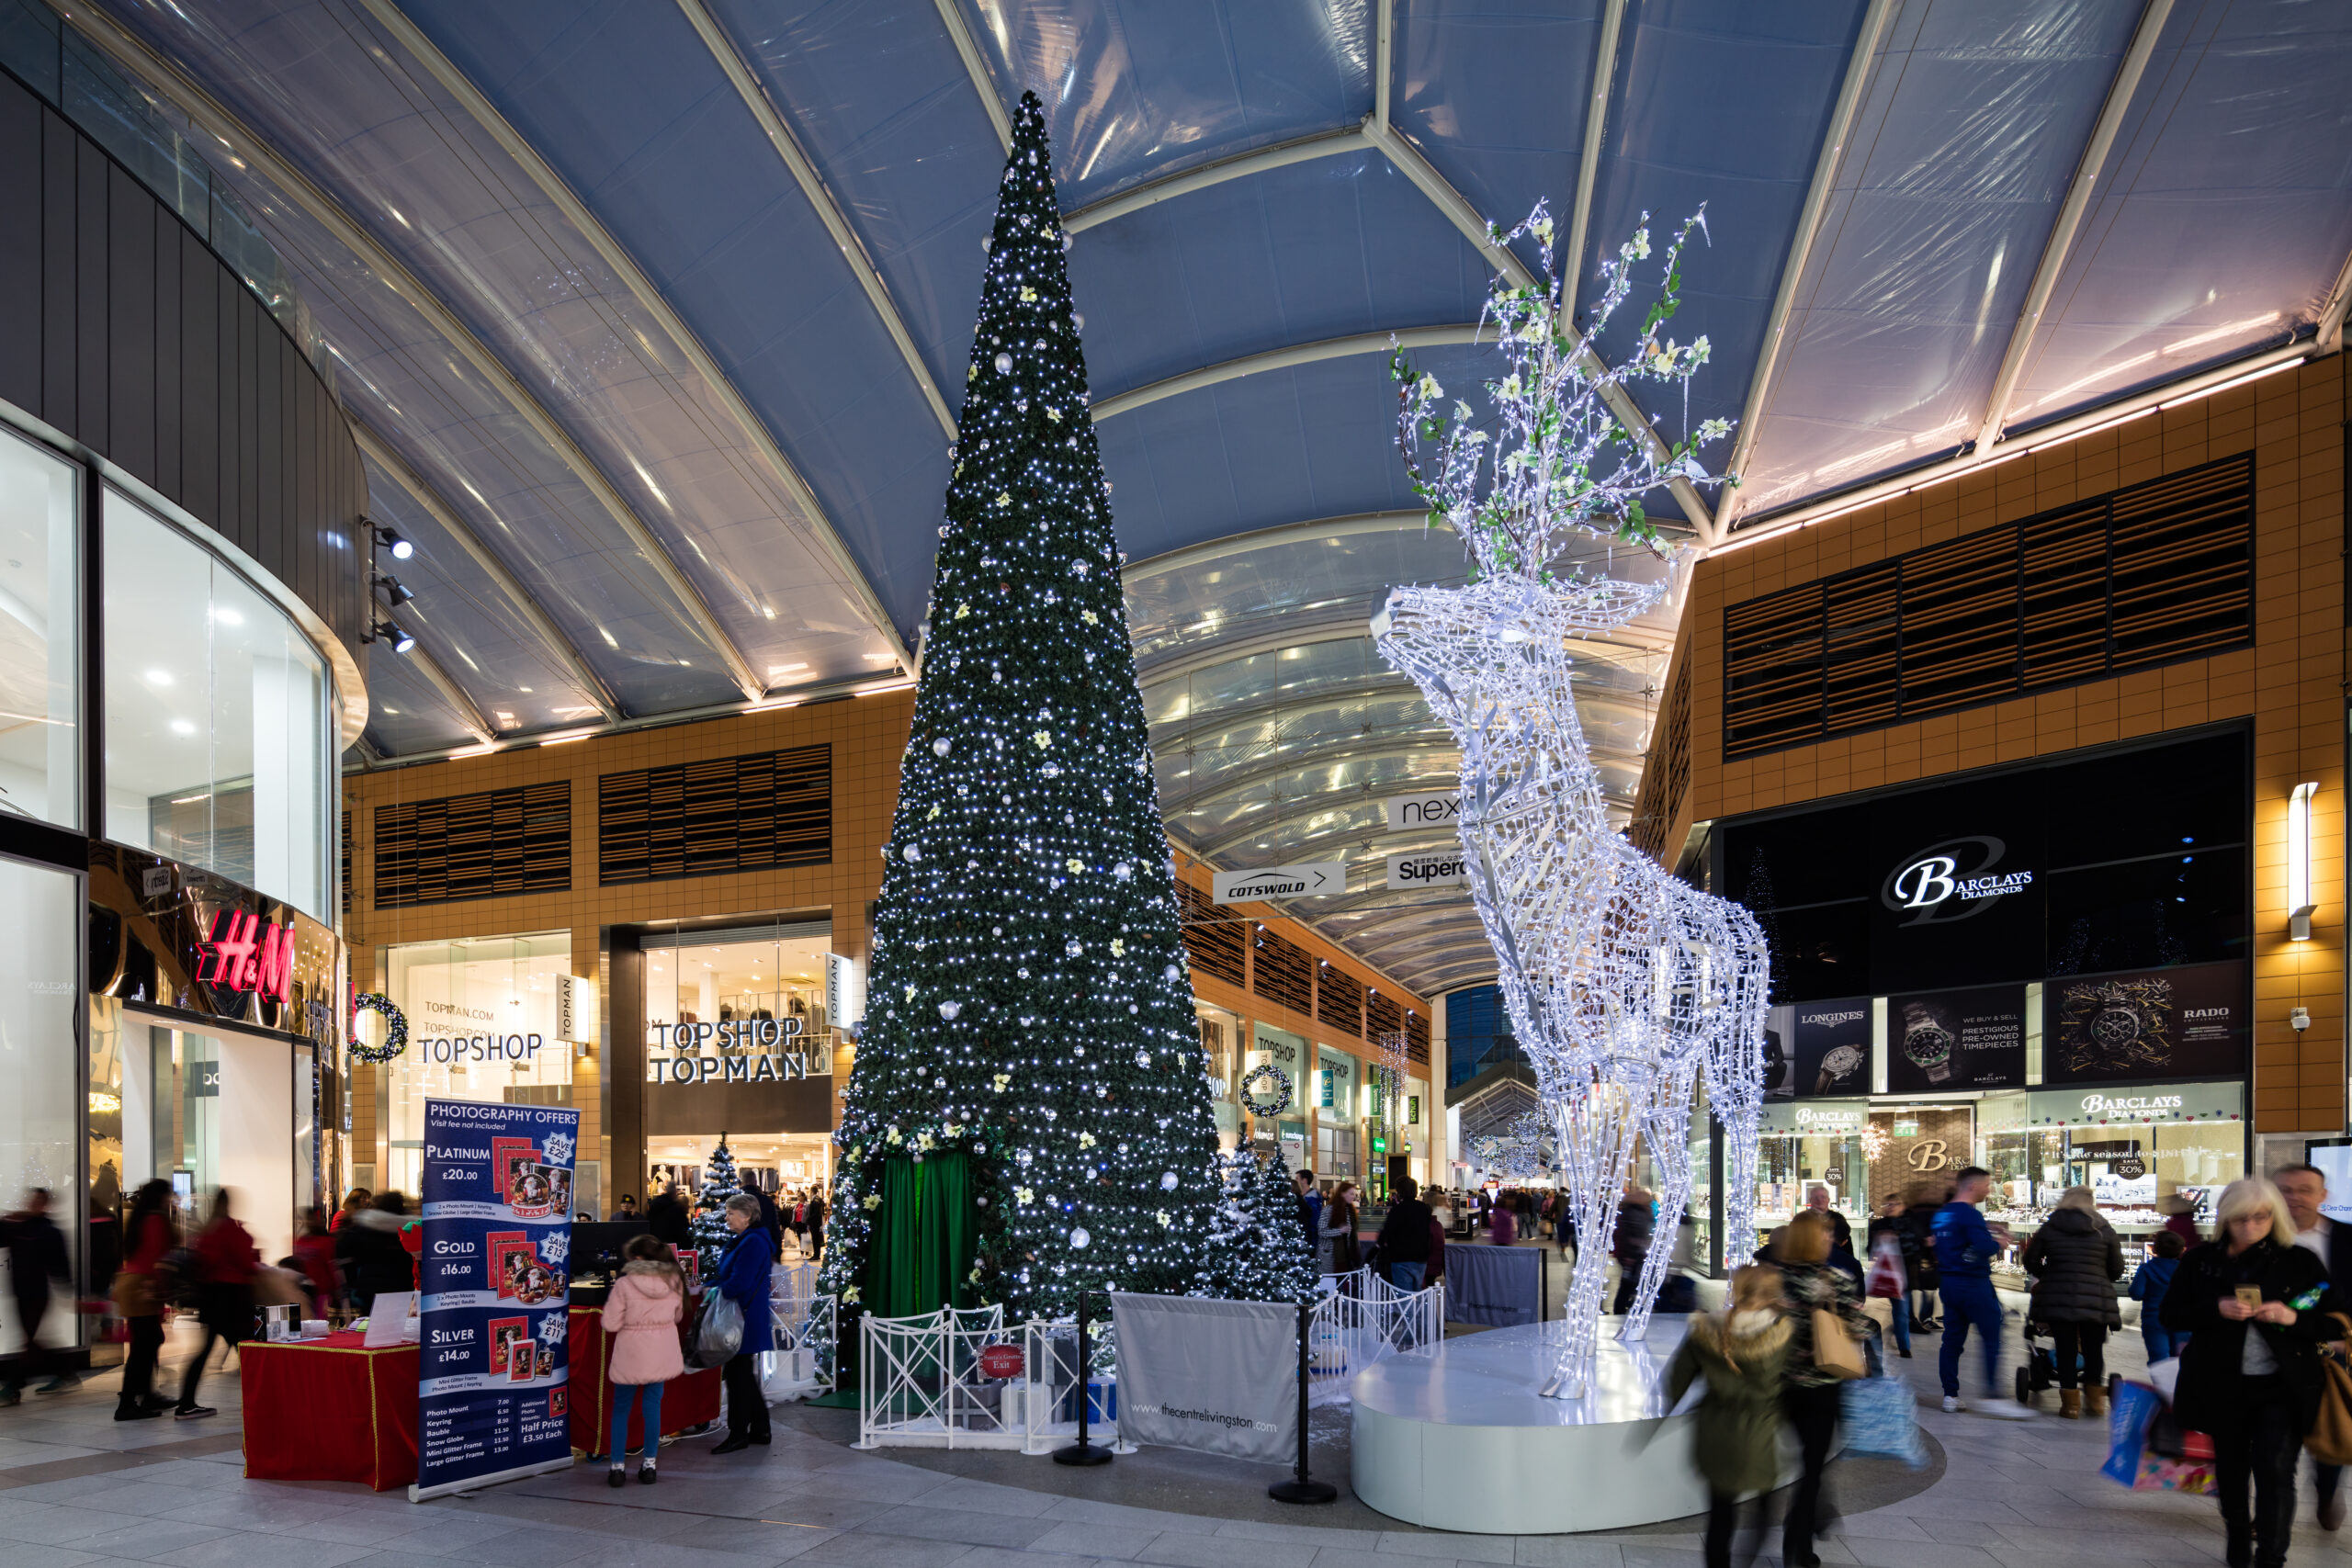 giant stag sculpture and christmas tree at the livingston shopping centre